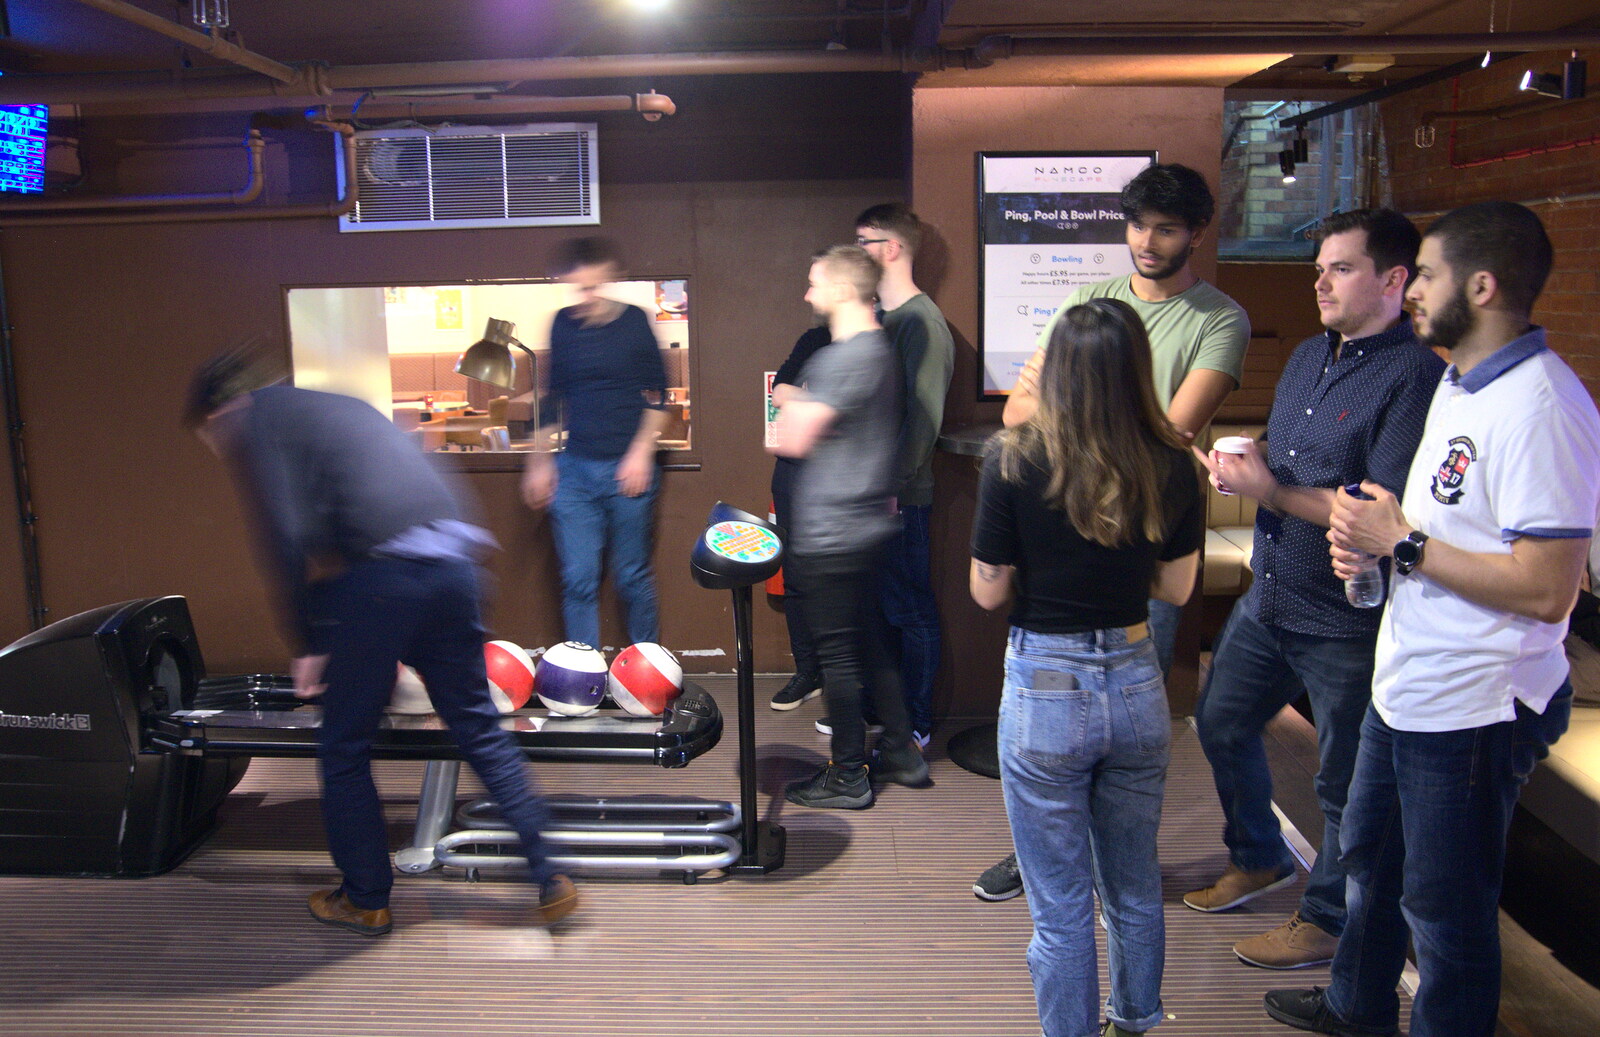 Hanging out on the bowling lanes from A Team Outing at Namco Funscape, South Bank, London - 27th March 2019